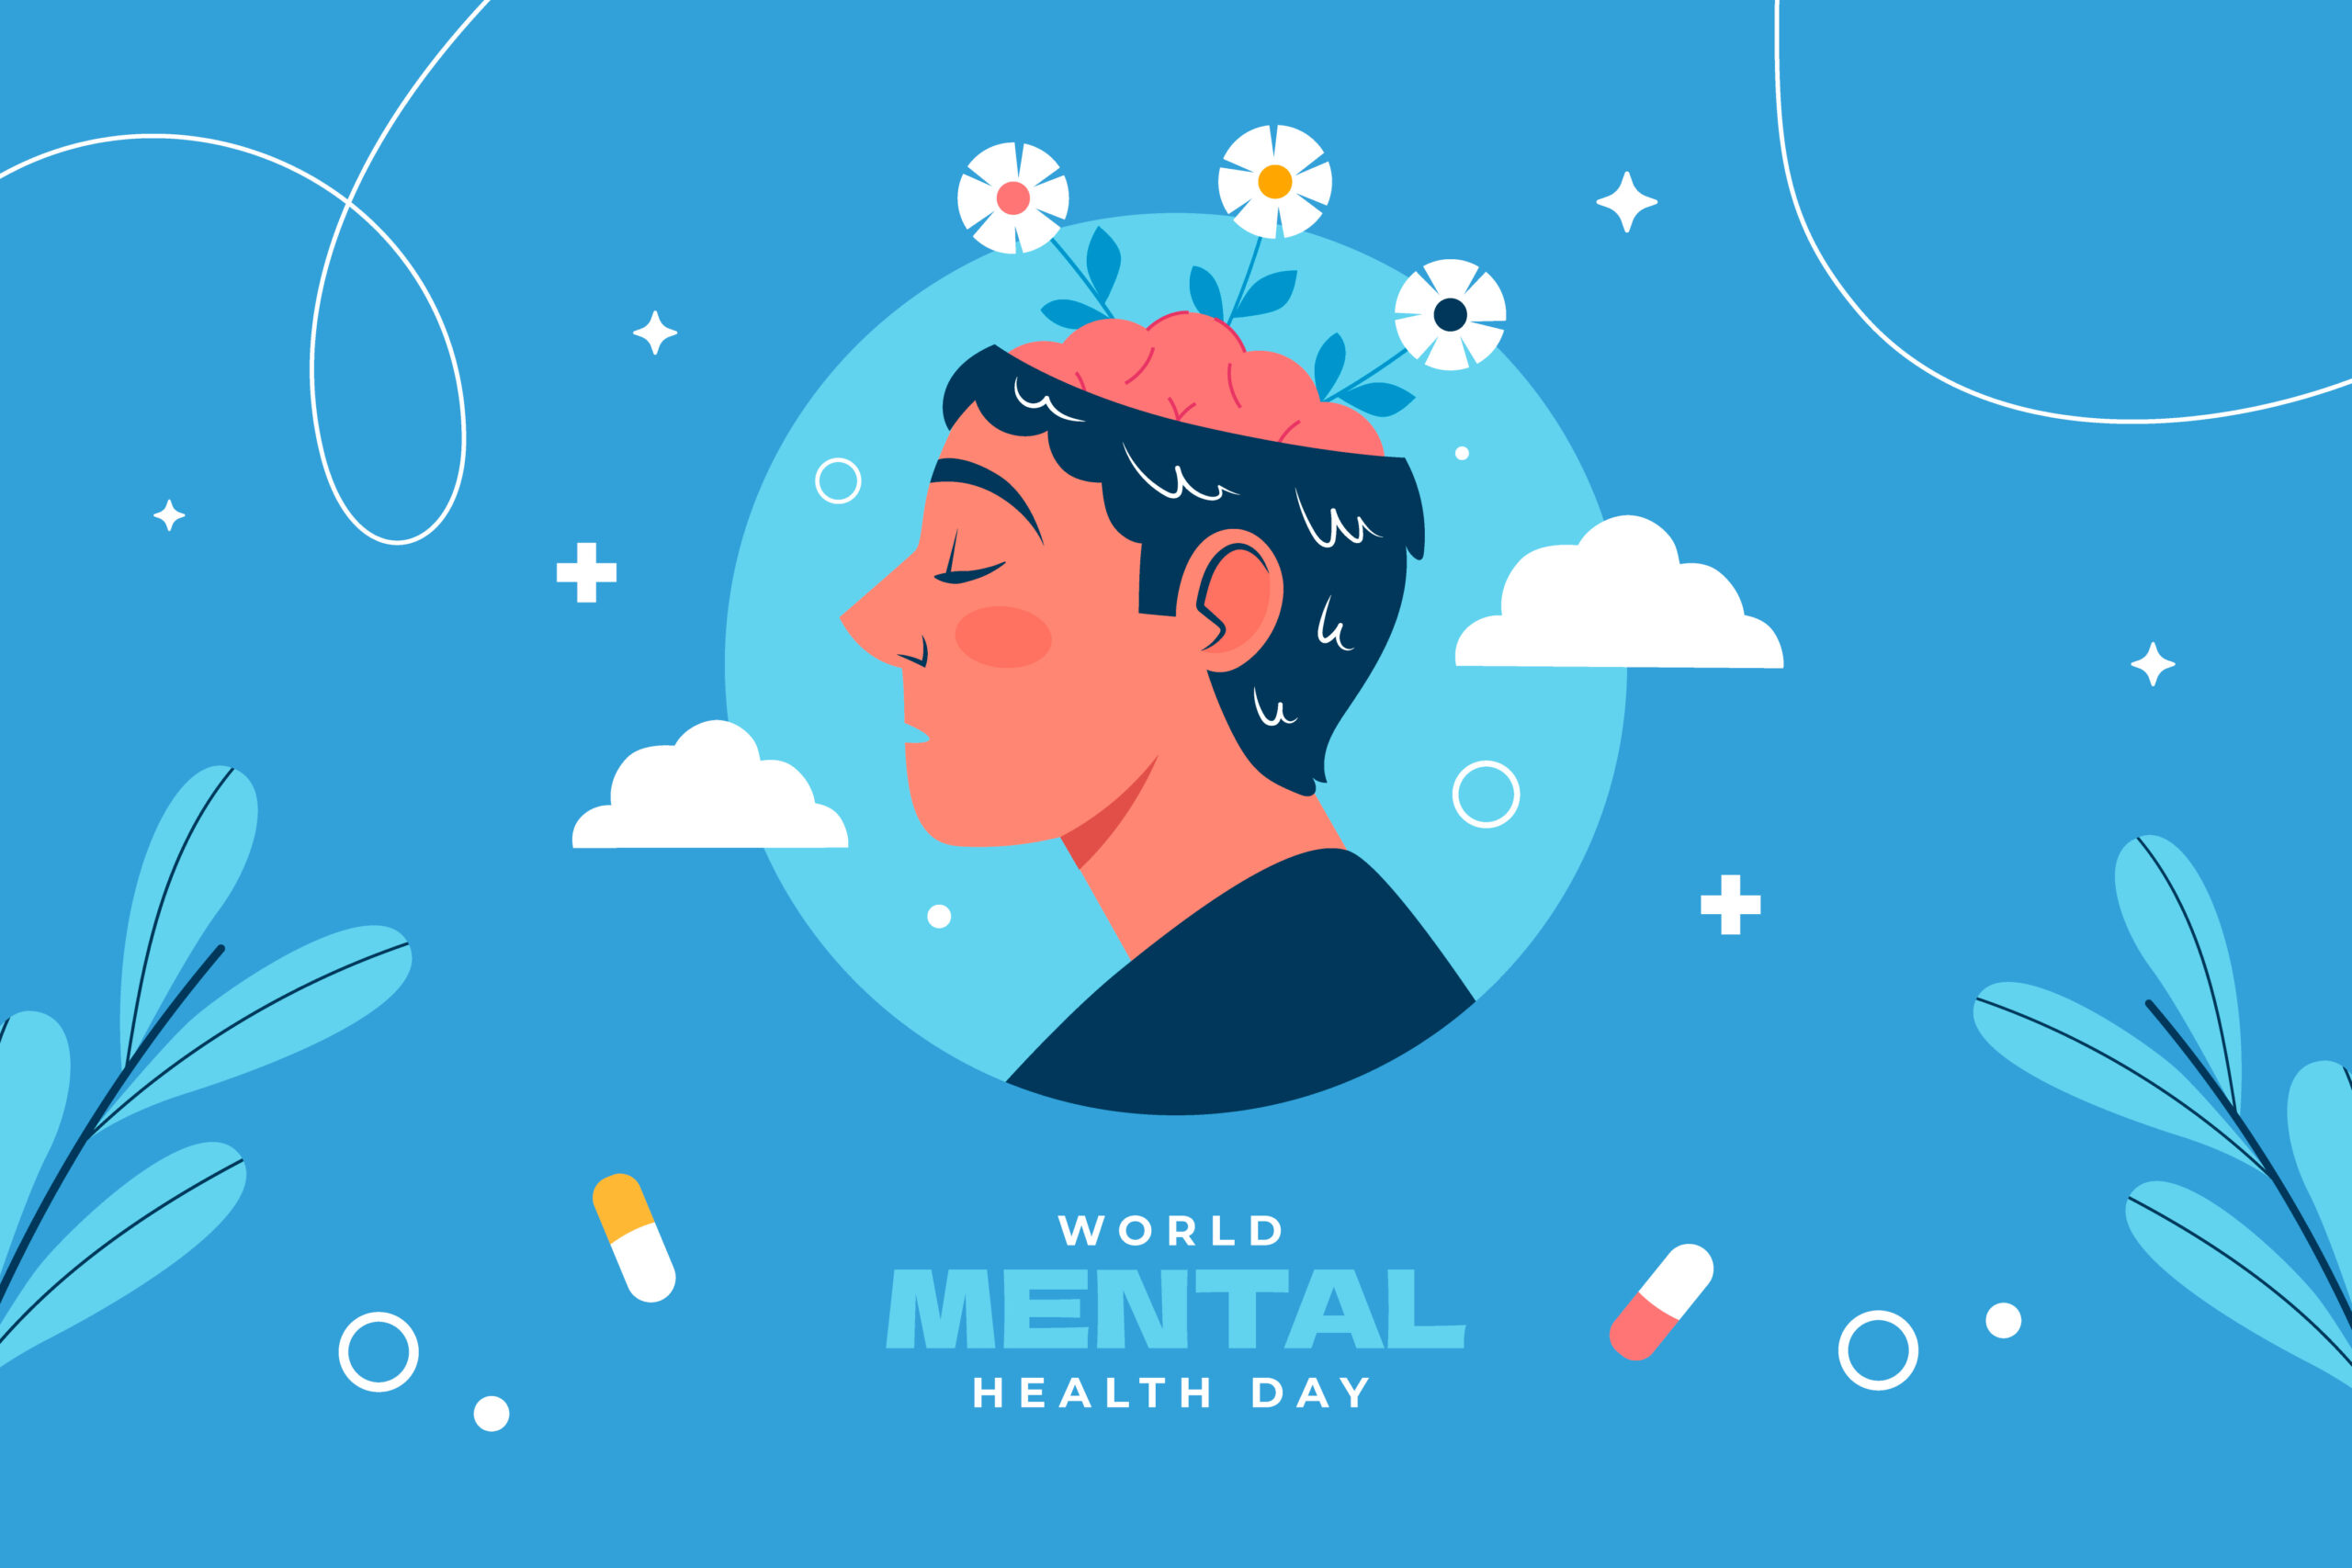 At Clearfork we celebrate World Mental Health Day and encourage teens to work everyday on their mental health.